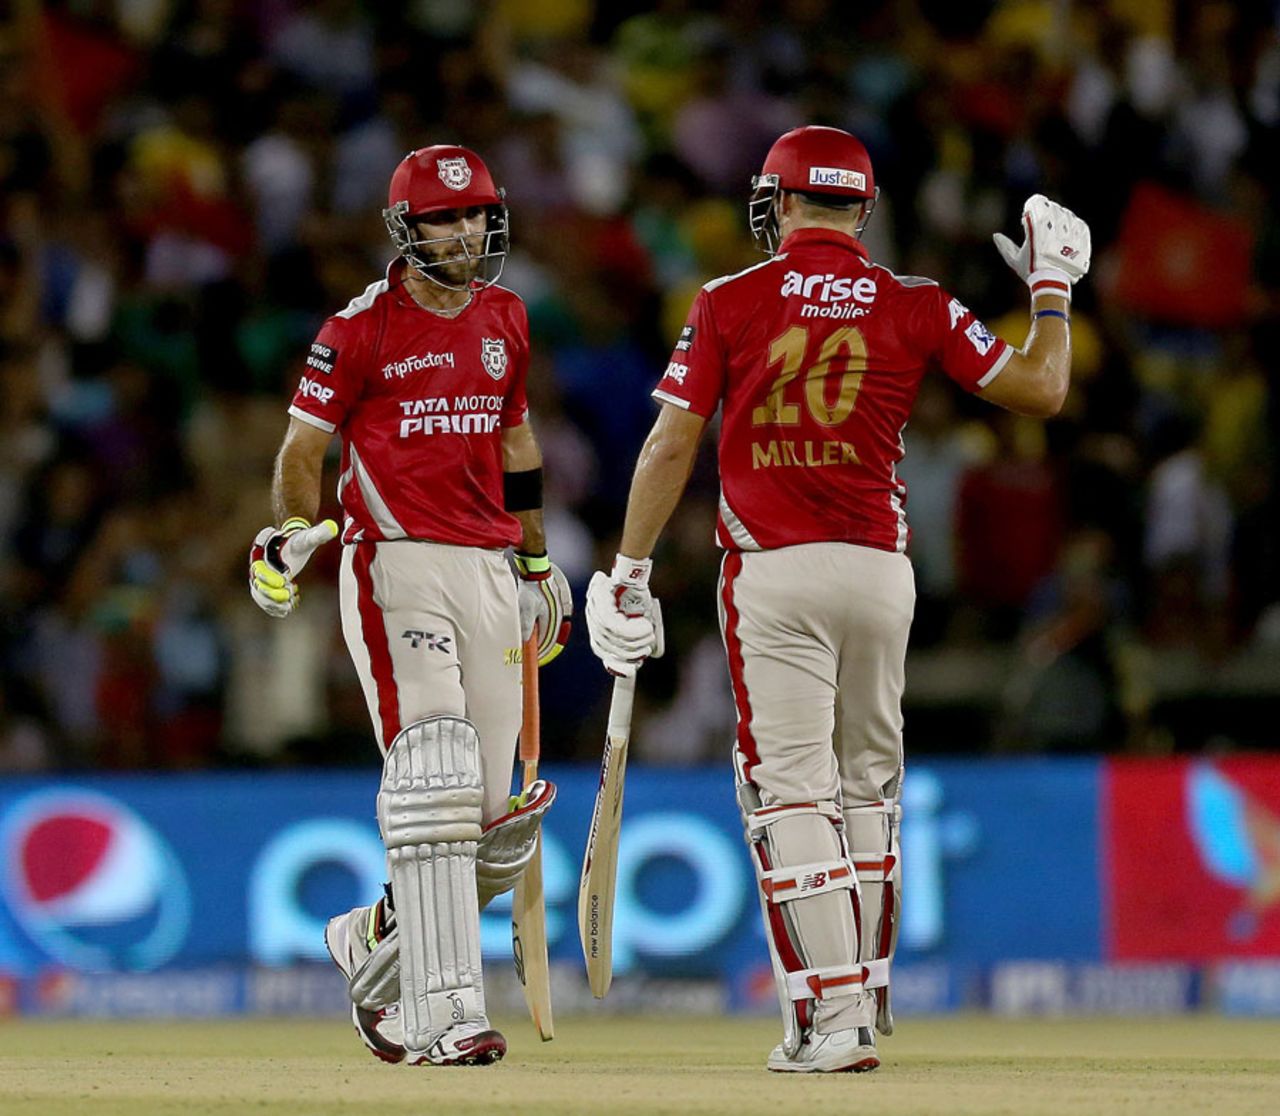 Glenn Maxwell and David Miller added 134 for the third wicket, Kings XI Punjab v Chennai Super Kings, IPL 2014, Cuttack, May 7, 2014